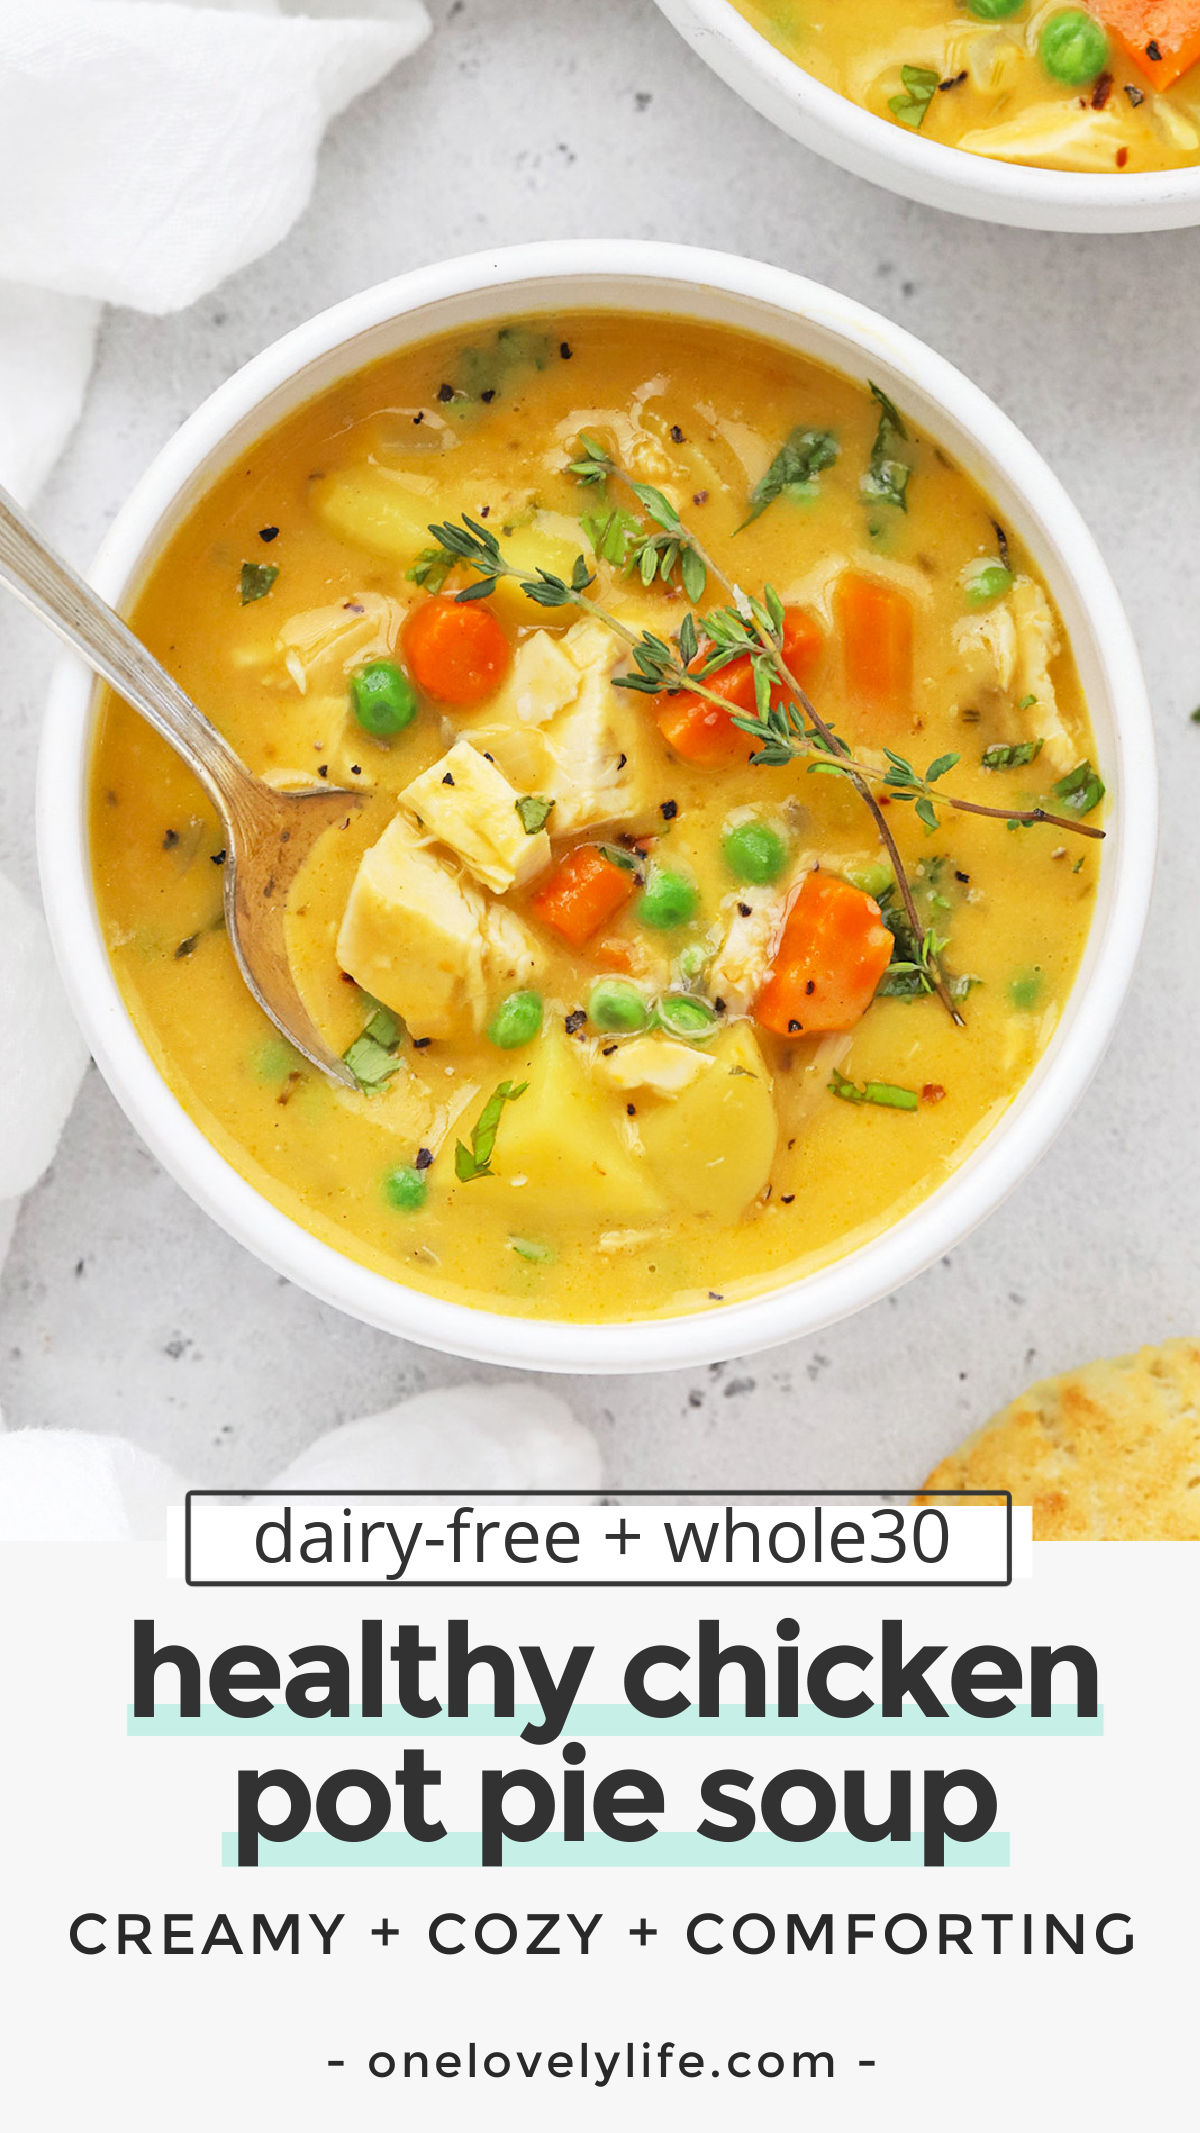 Healthy Chicken Pot Pie Soup - This dairy-free chicken pot pie soup is creamy, delicious, and cozy on a chilly day! (Whole30) // Whole30 Chicken Pot Pie Soup // Healthy Pot Pie Soup // Healthy Turkey Pot Pie Soup // Turkey Leftovers // Thanksgiving Leftovers // Dairy-Free turkey Pot Pie Soup // Whole30 Soup Recipe // Dairy-Free Soup Recipe // Healthy Soup Recipe #glutenfree #healthysoup #soup #thanksgiving #thanksgivingleftovers #turkey #chickenpotpie #whole30 #dairyfree